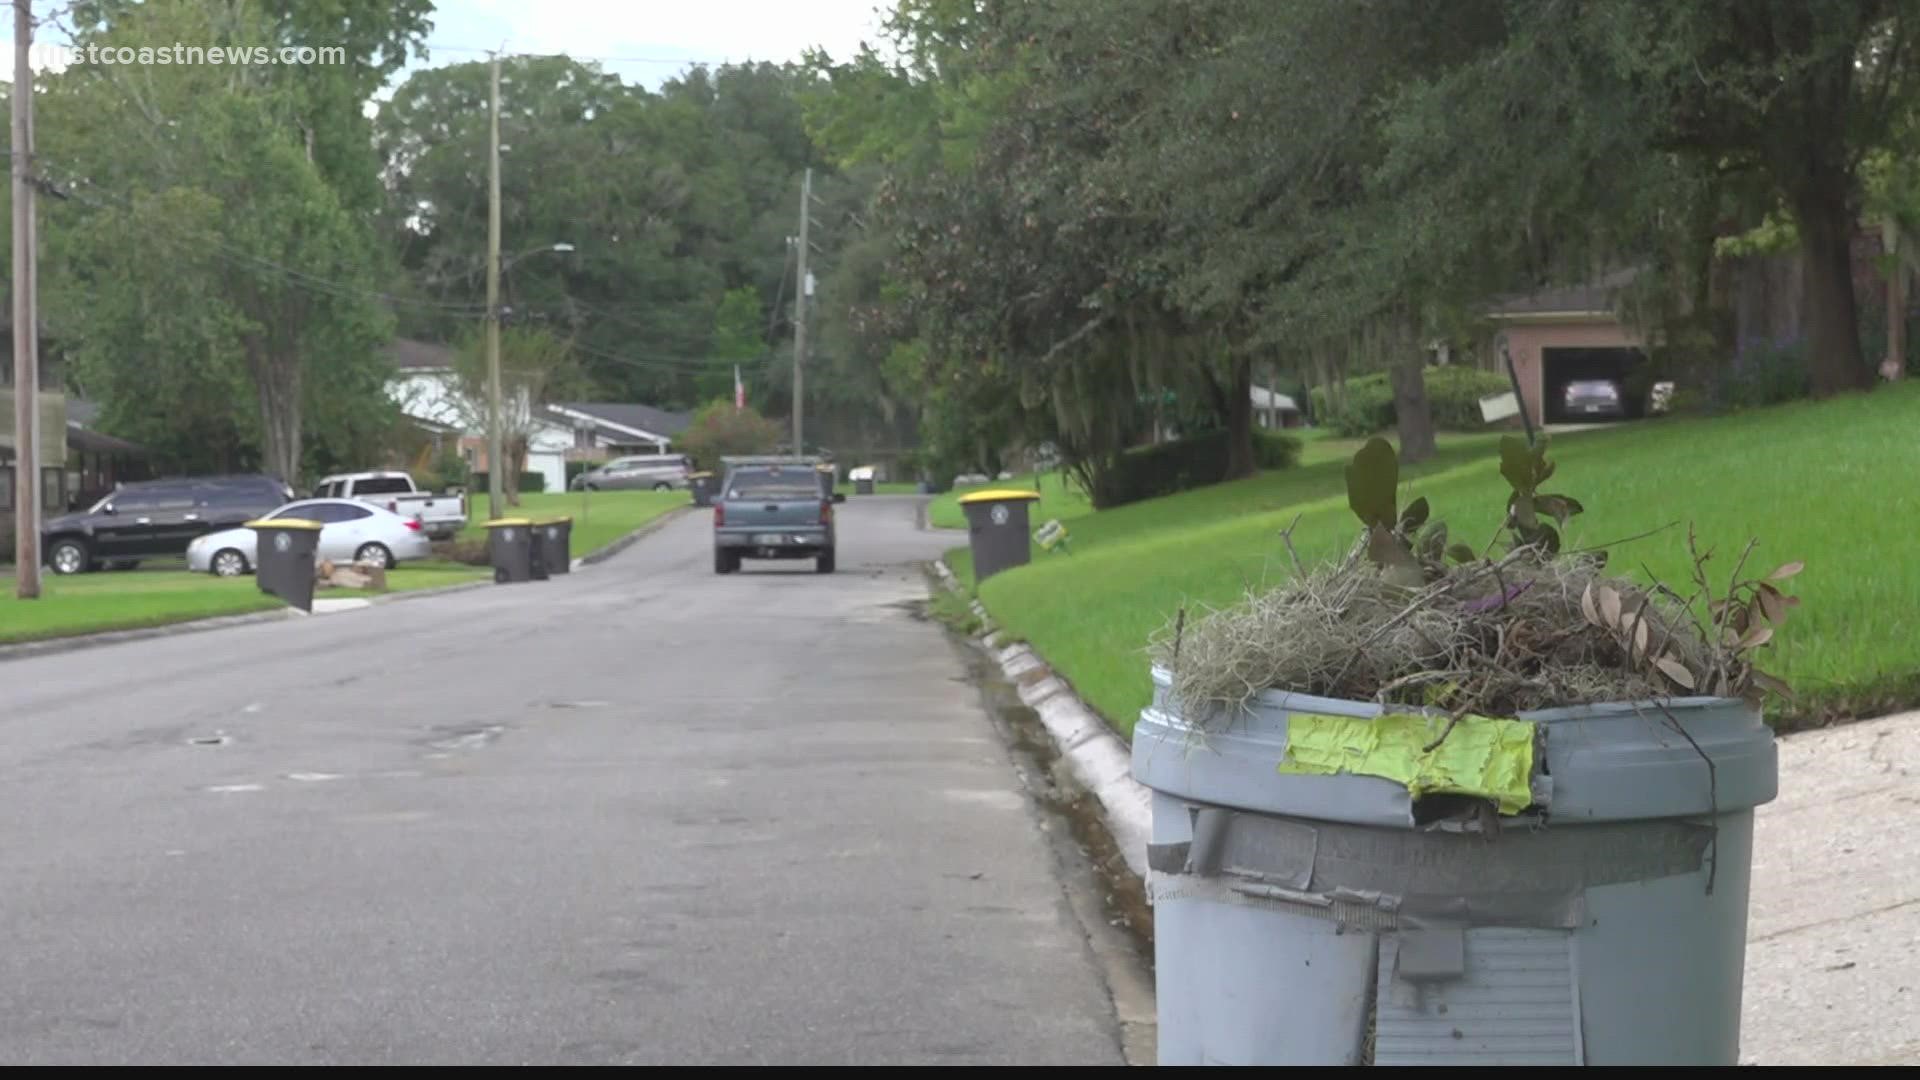 People who live in the area say household garbage has been picked up, but their yard waste and recycling haven't been picked up for a month.